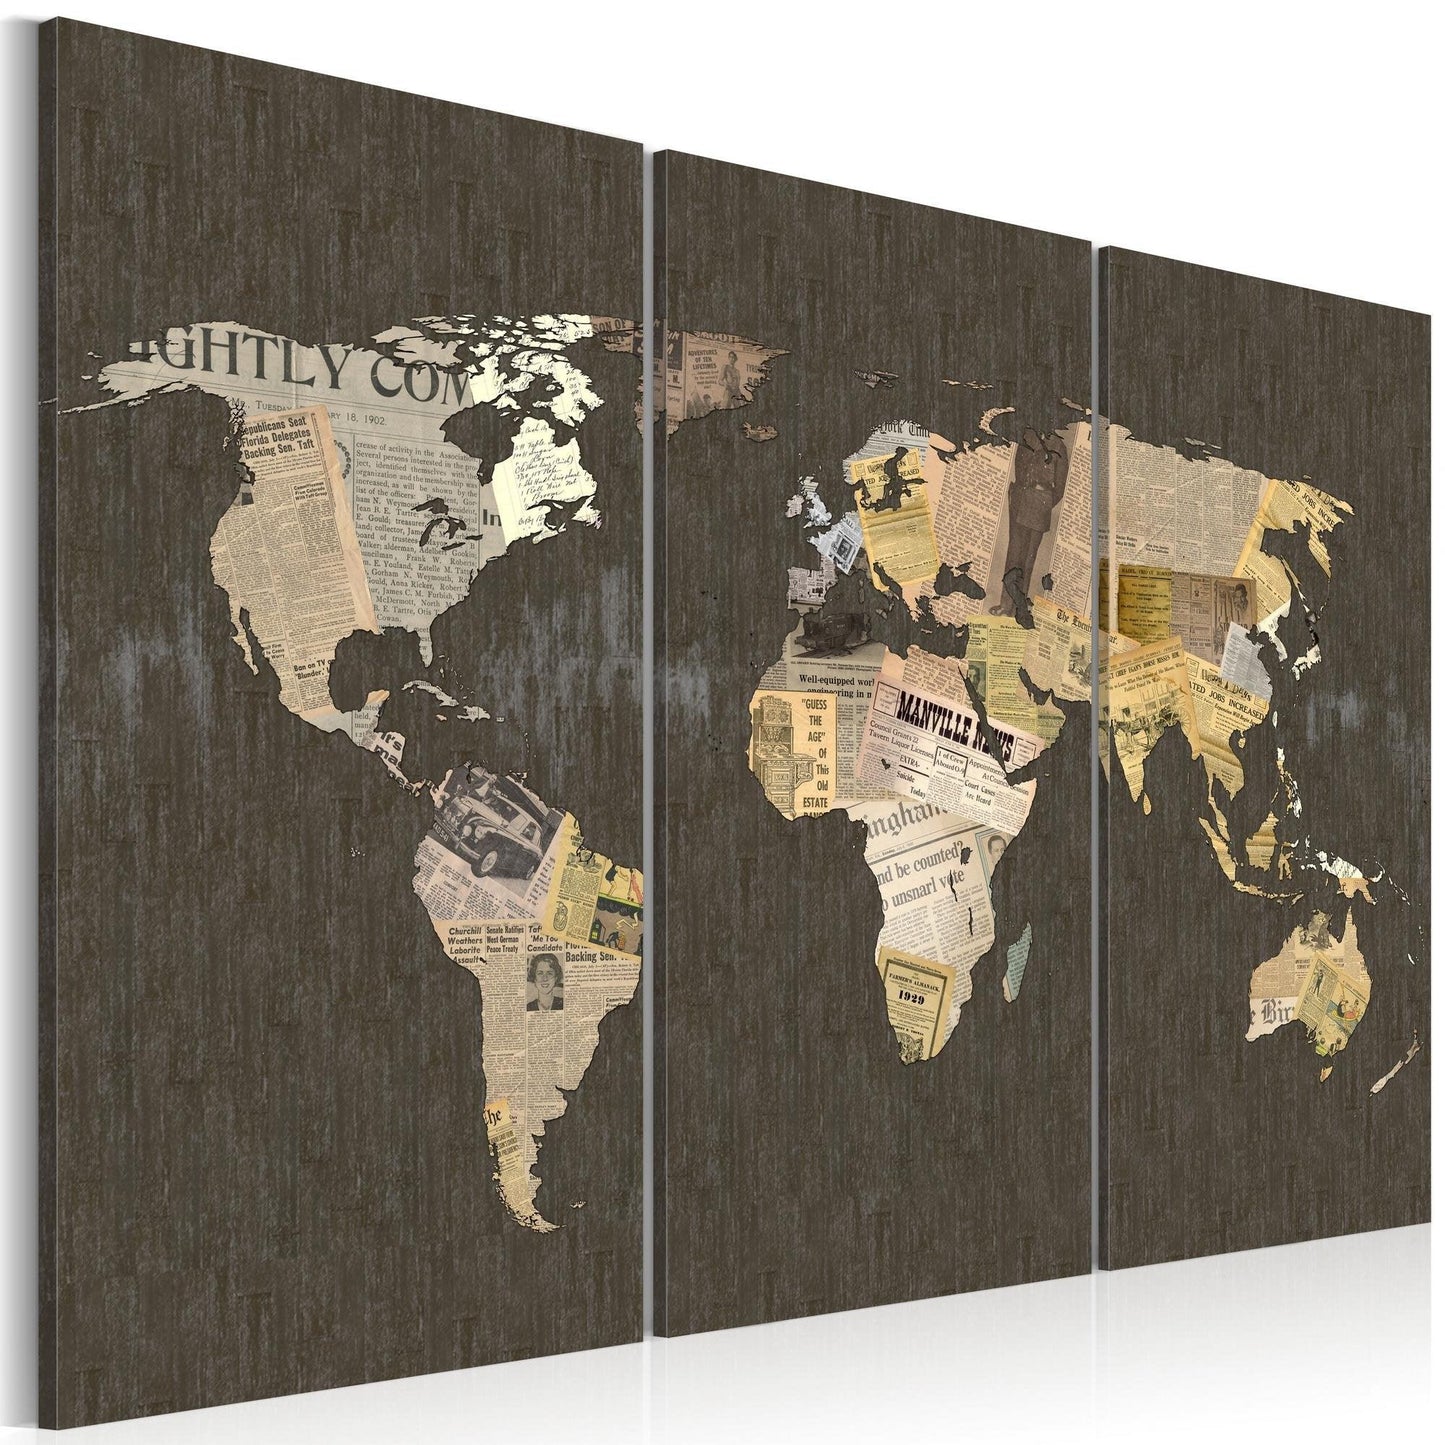 Canvas Print - News of the World - triptych - www.trendingbestsellers.com